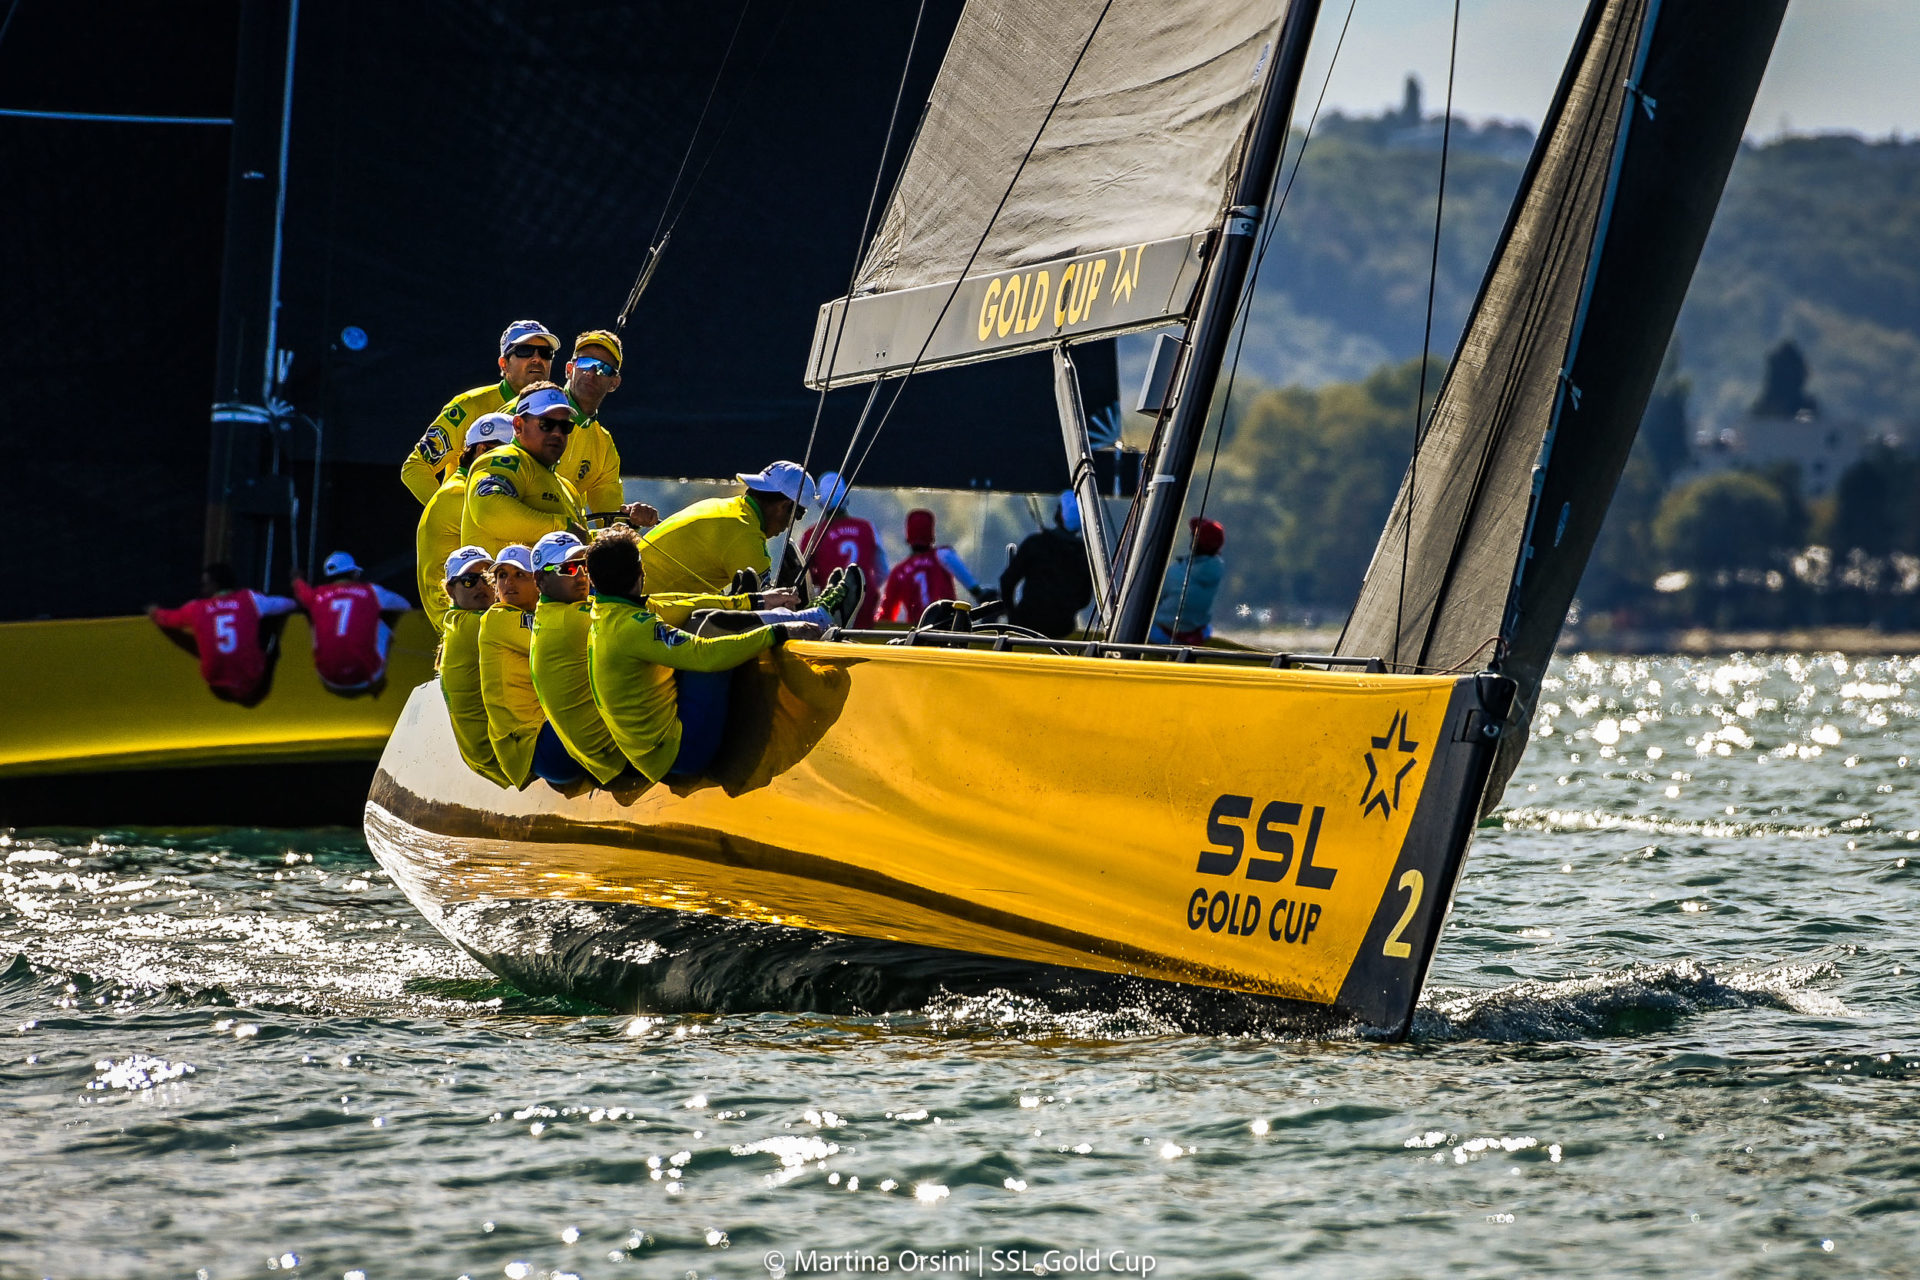 SSL TEST EVENT TWO: THE BRAZILIAN STORM TAKES TWO MORE RACES